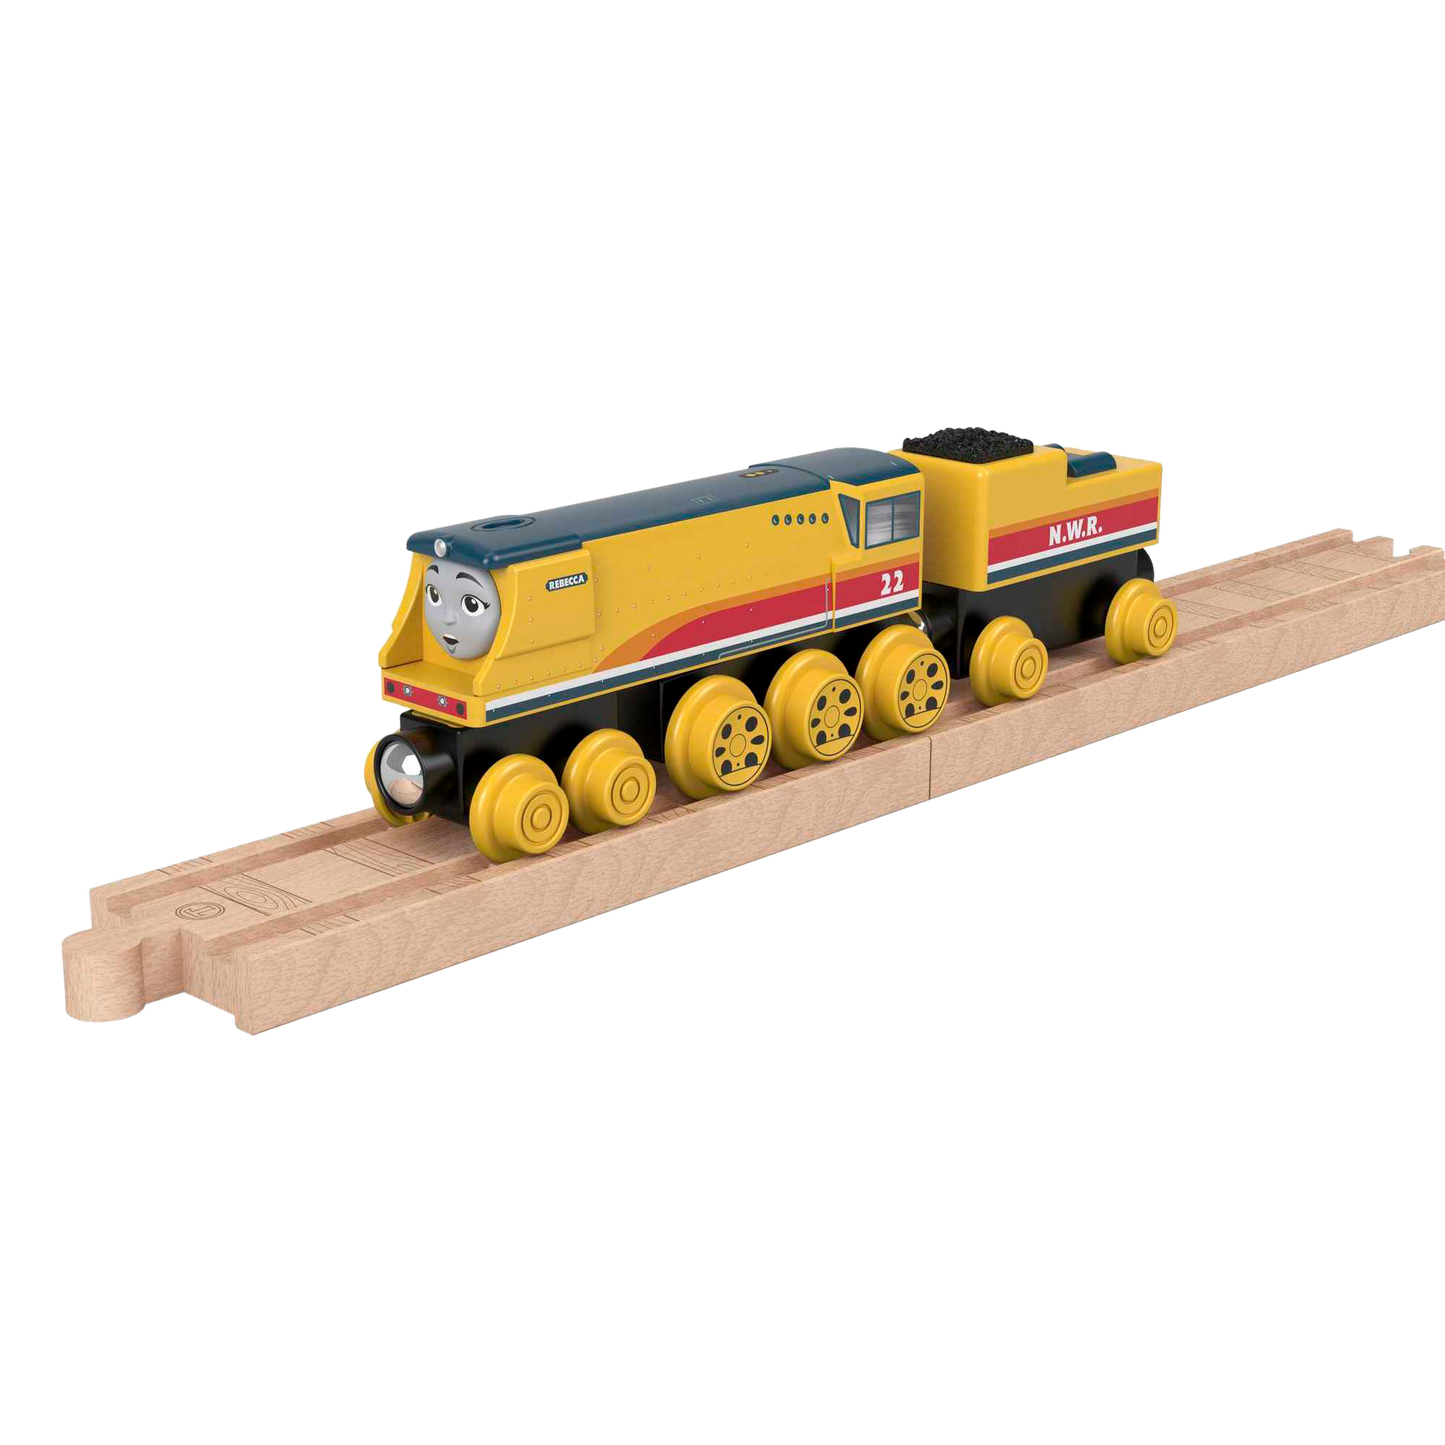 Fisher-Price Thomas & Friends Wooden Railway Rebecca Engine and Coal-Car